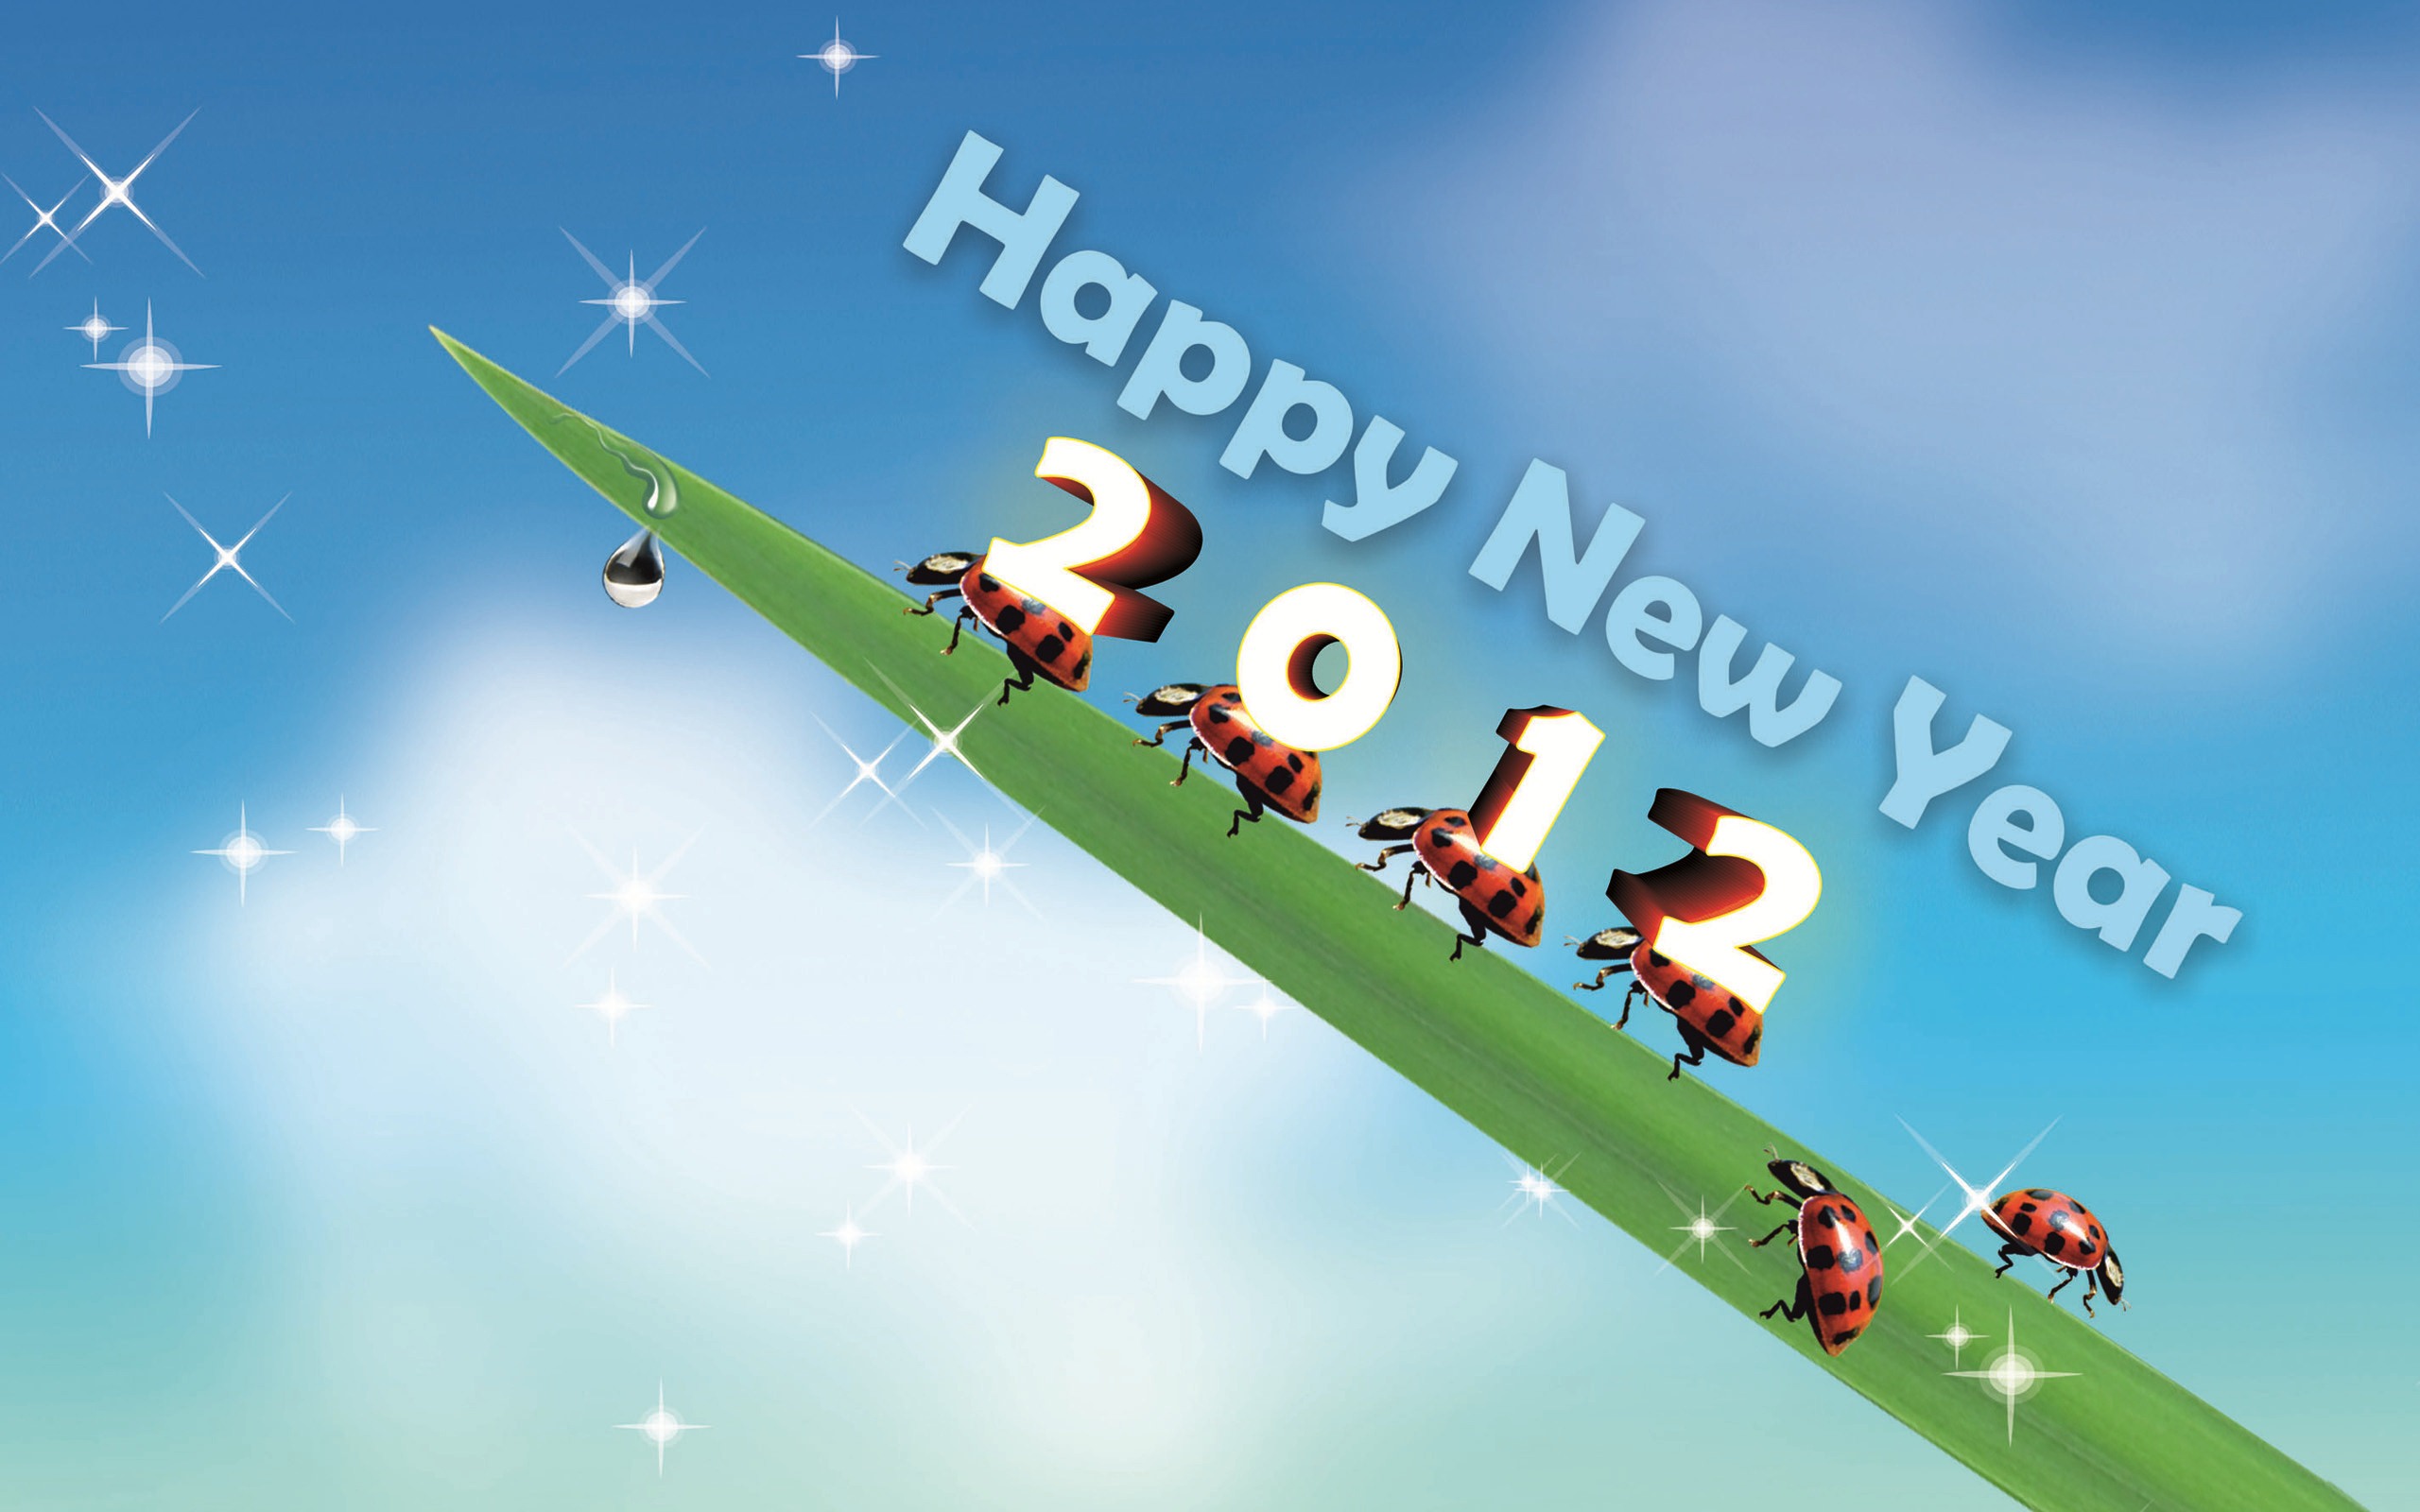 2012 New Year wallpapers (2) #8 - 2560x1600